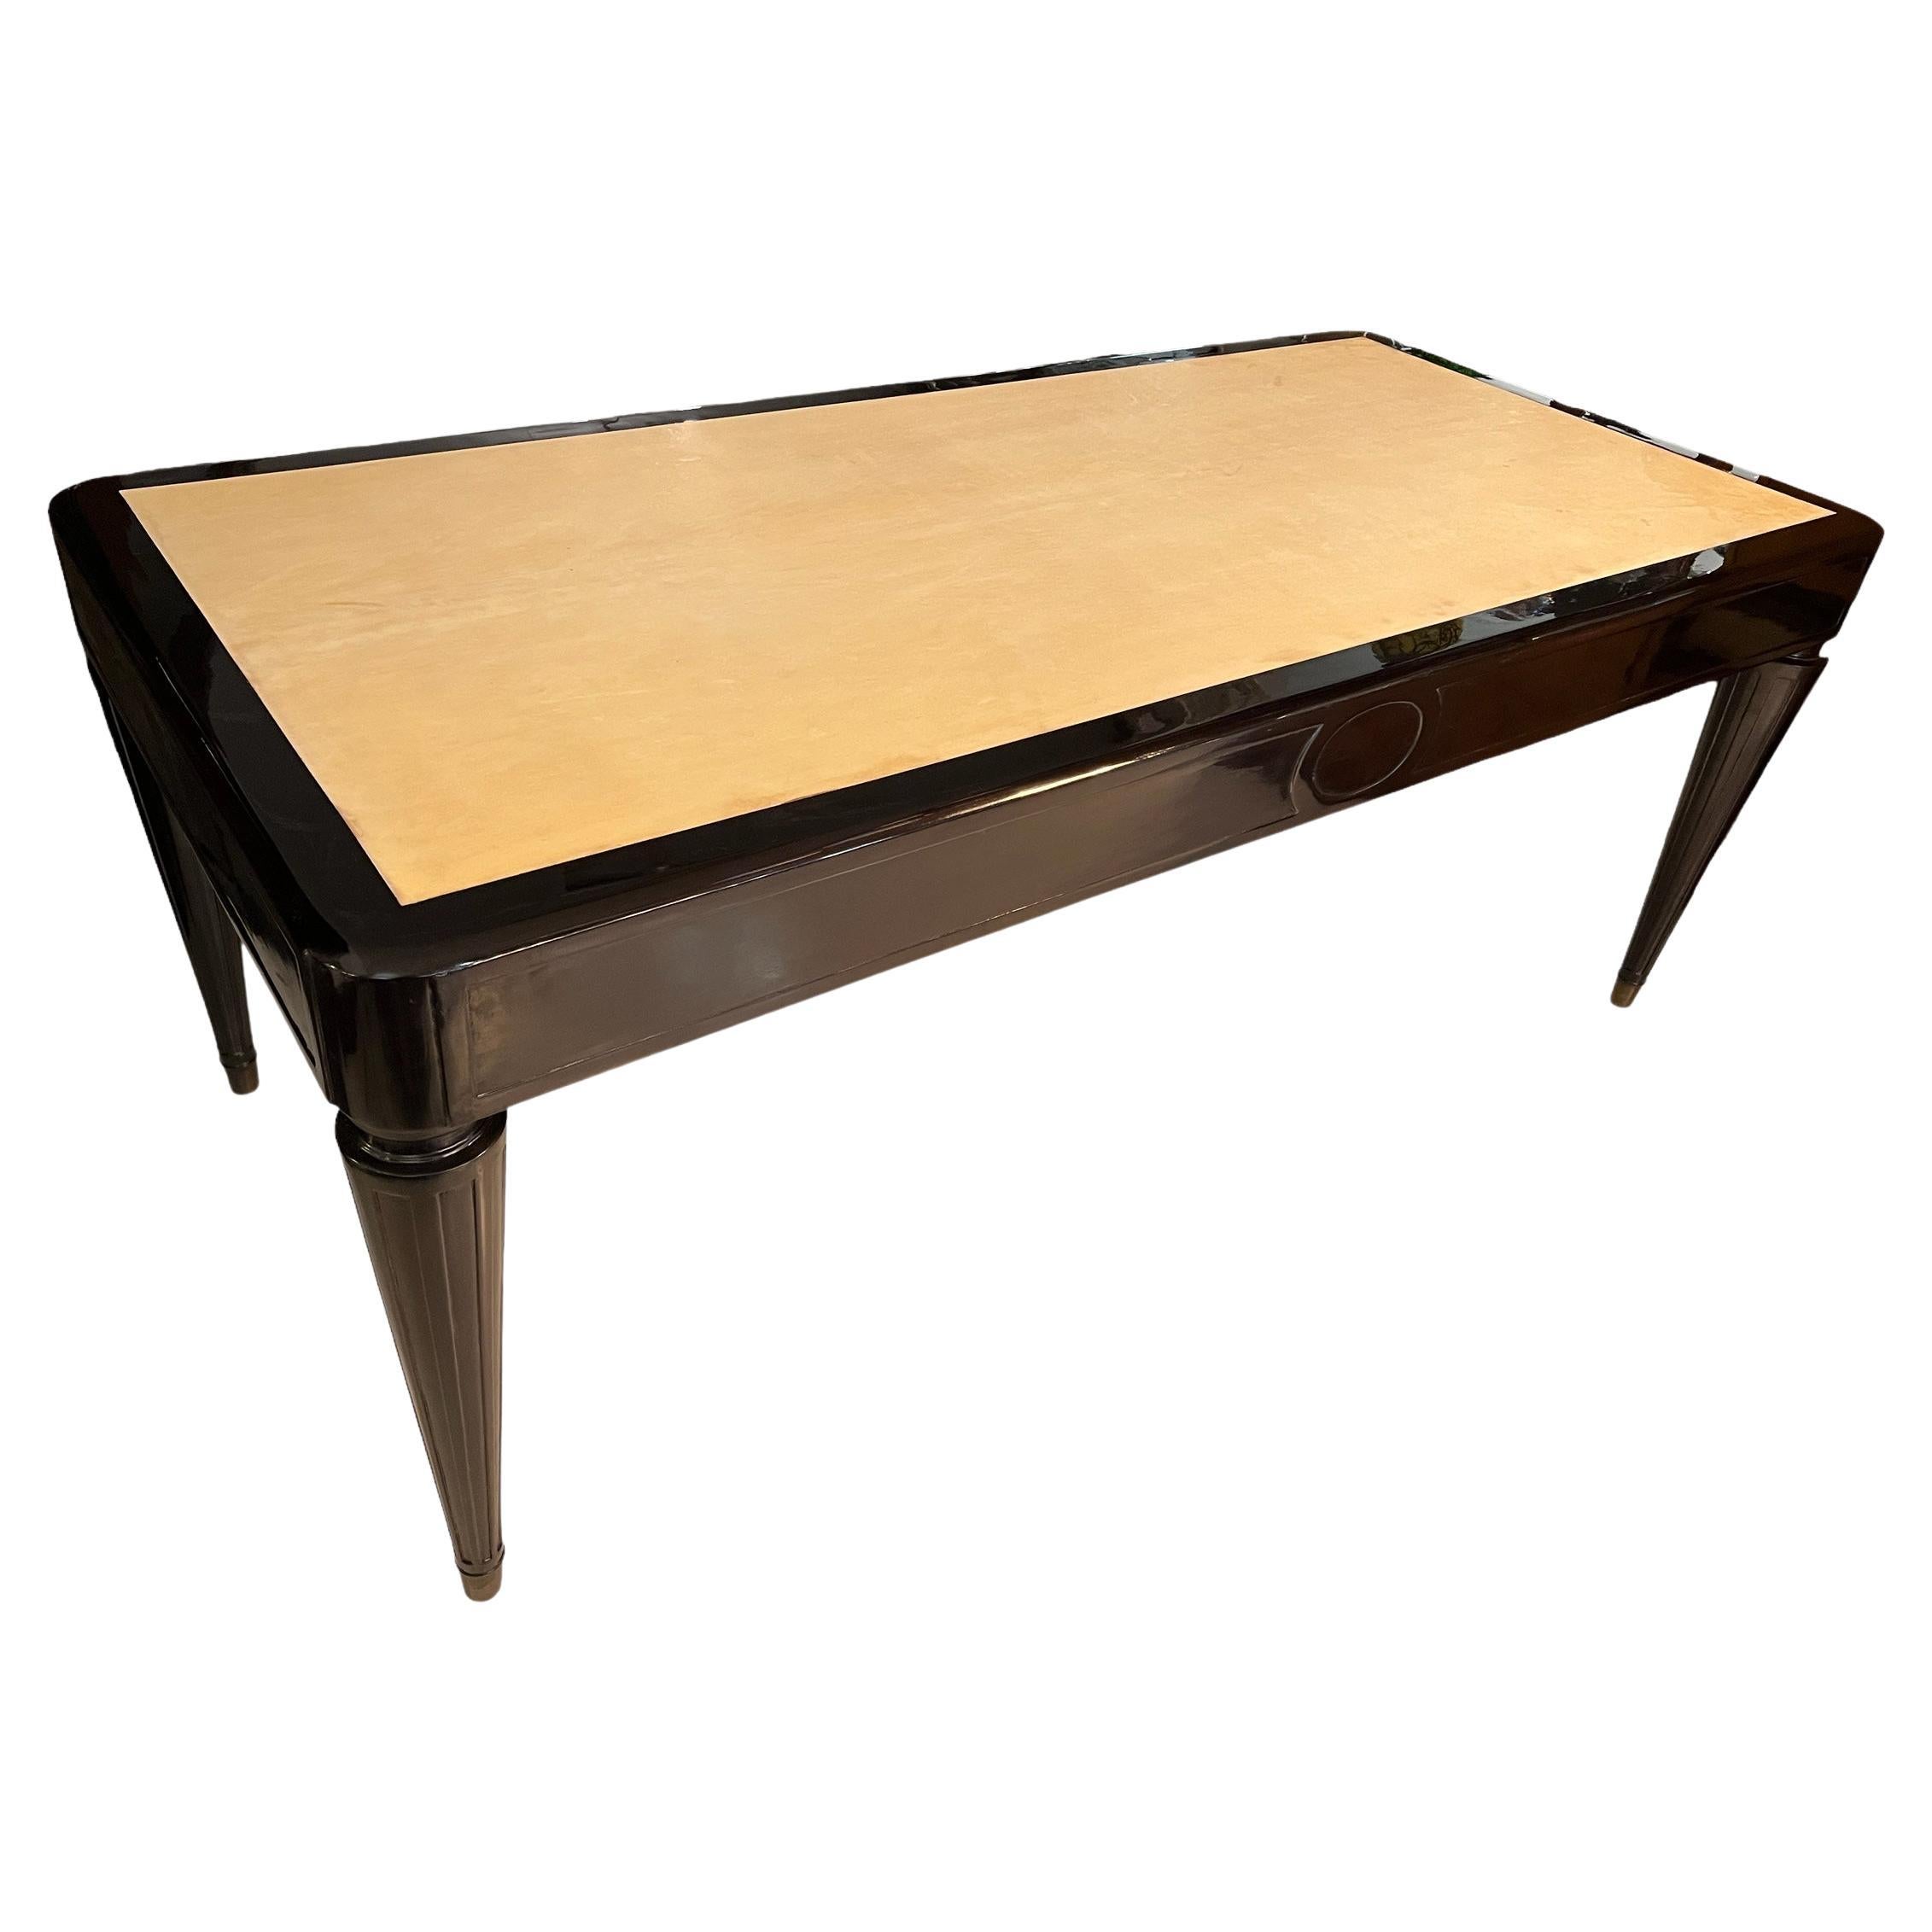 Big Desk Art Deco in Wood and Parchment, with 3 Drawers, 1930, Made in France